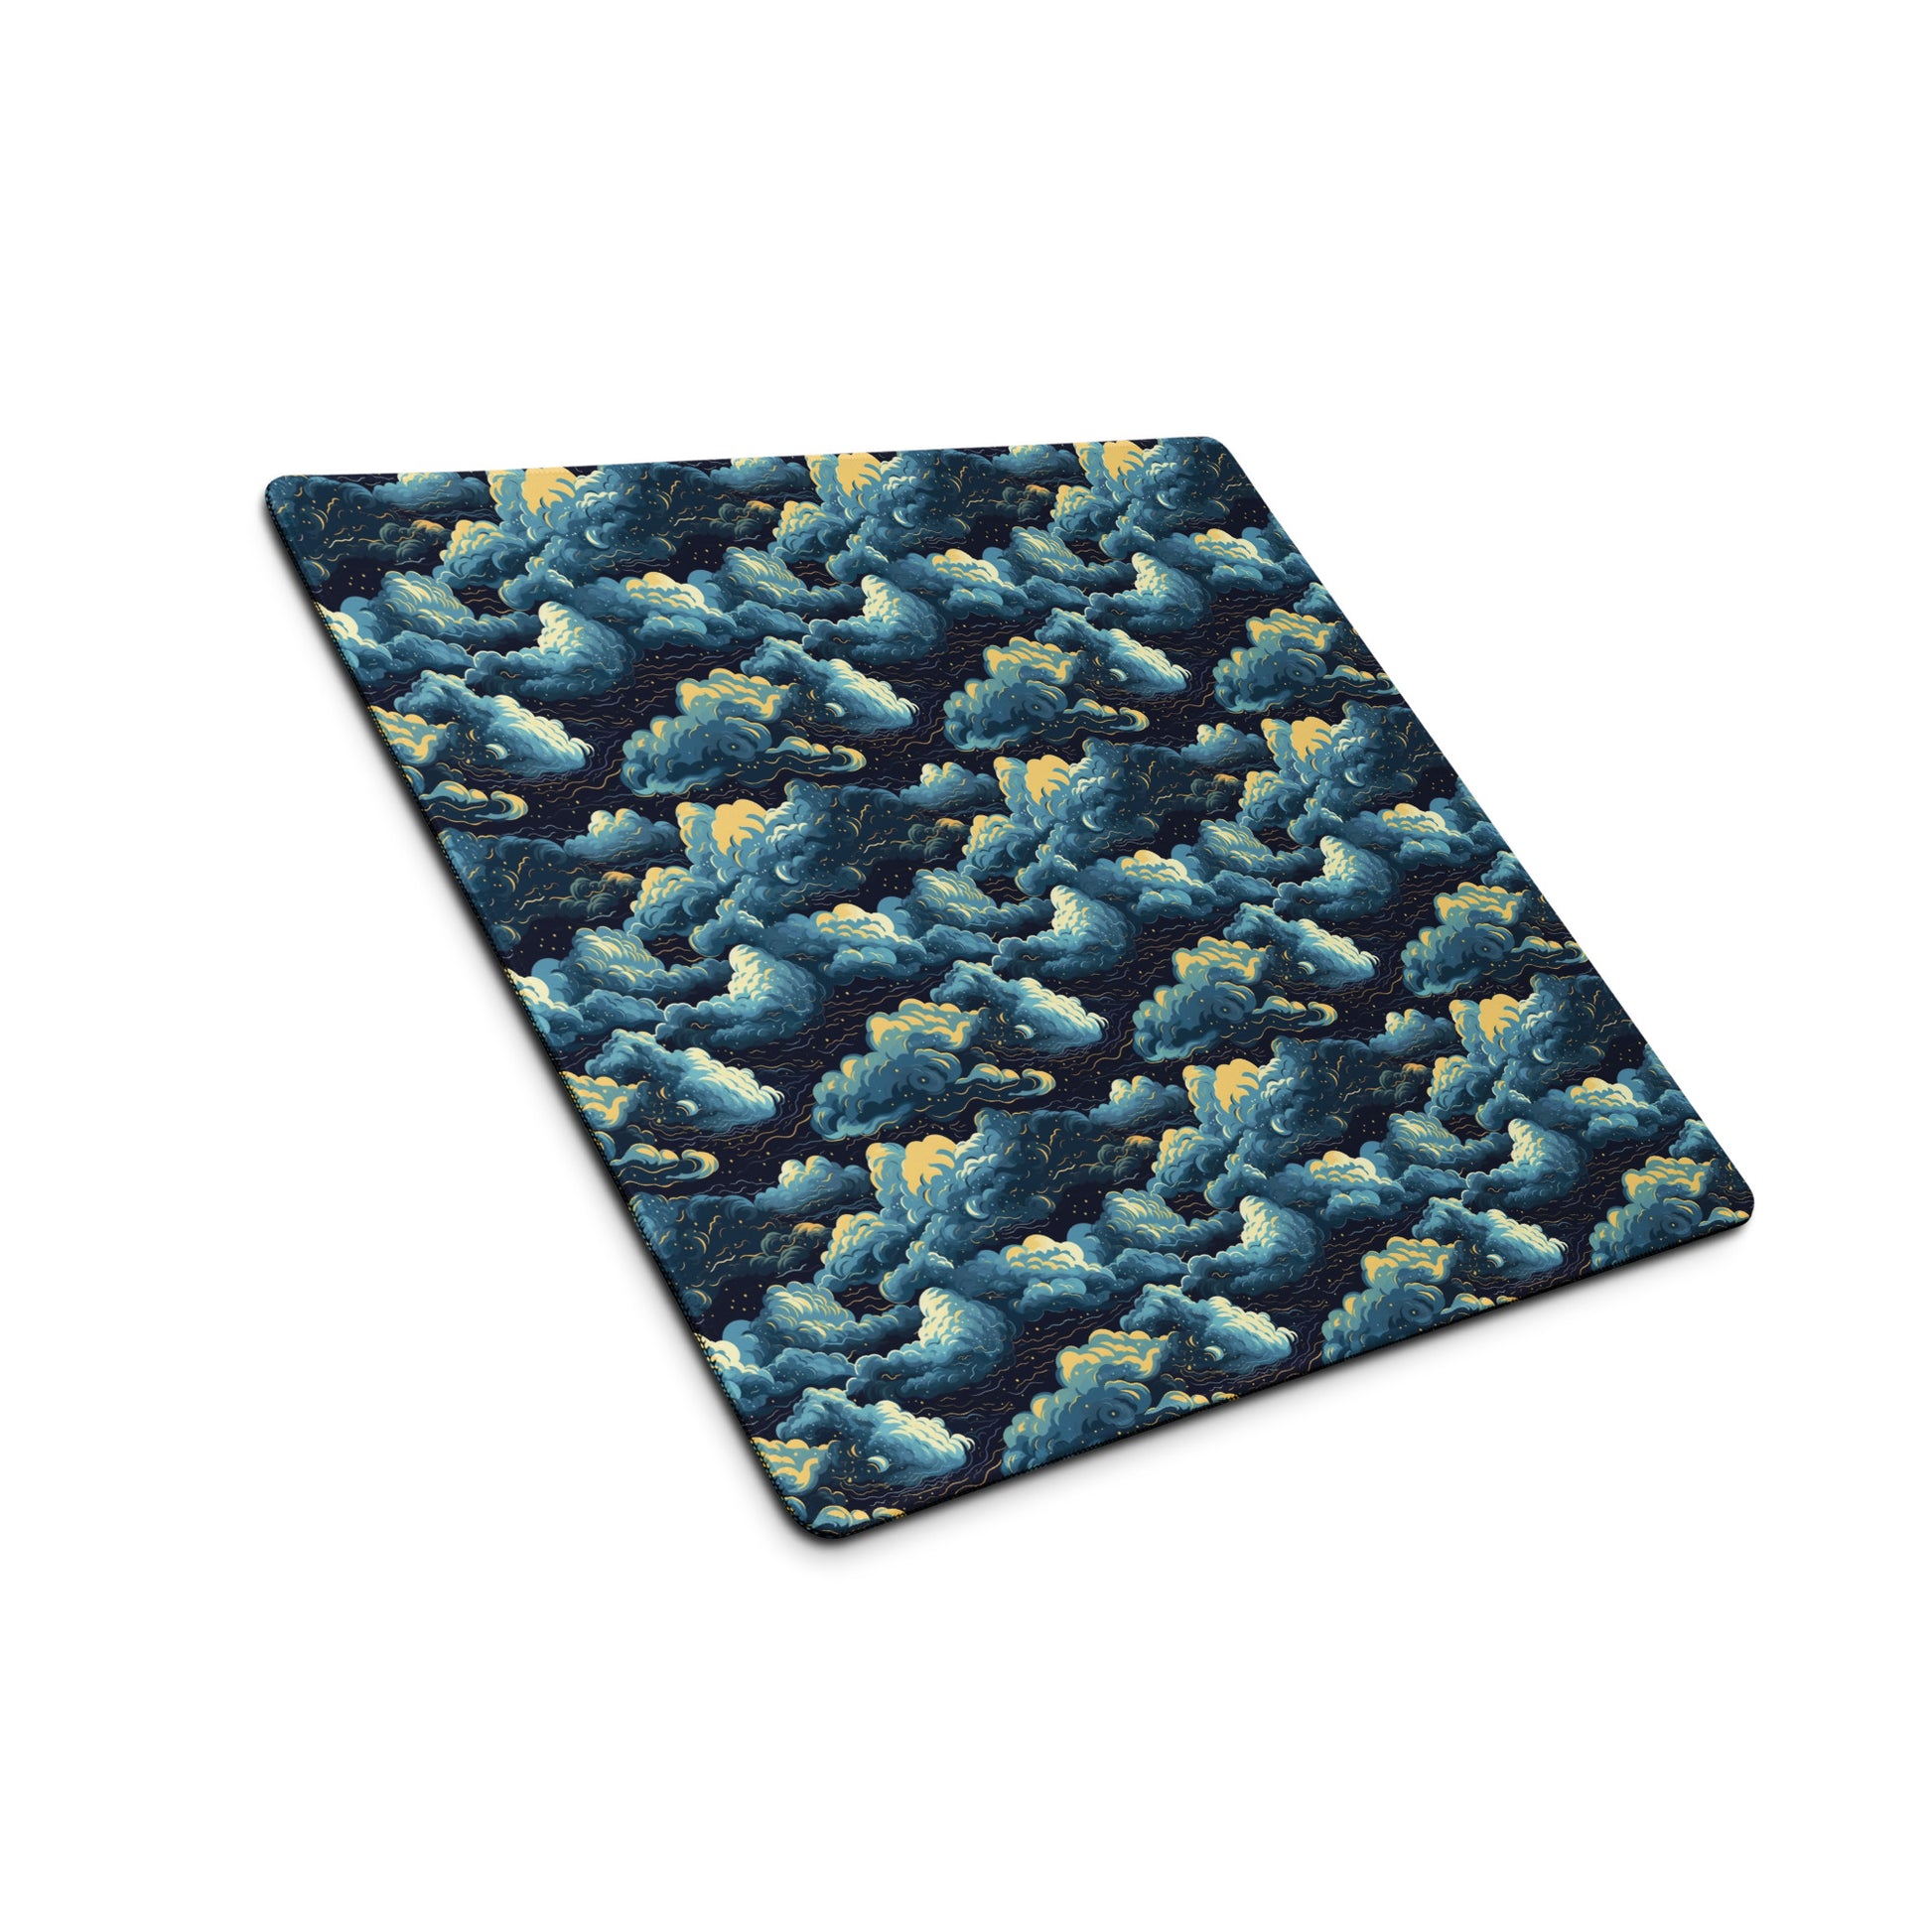 A 18" x 16" desk pad with a cloudy night sky pattern sitting at an angle.